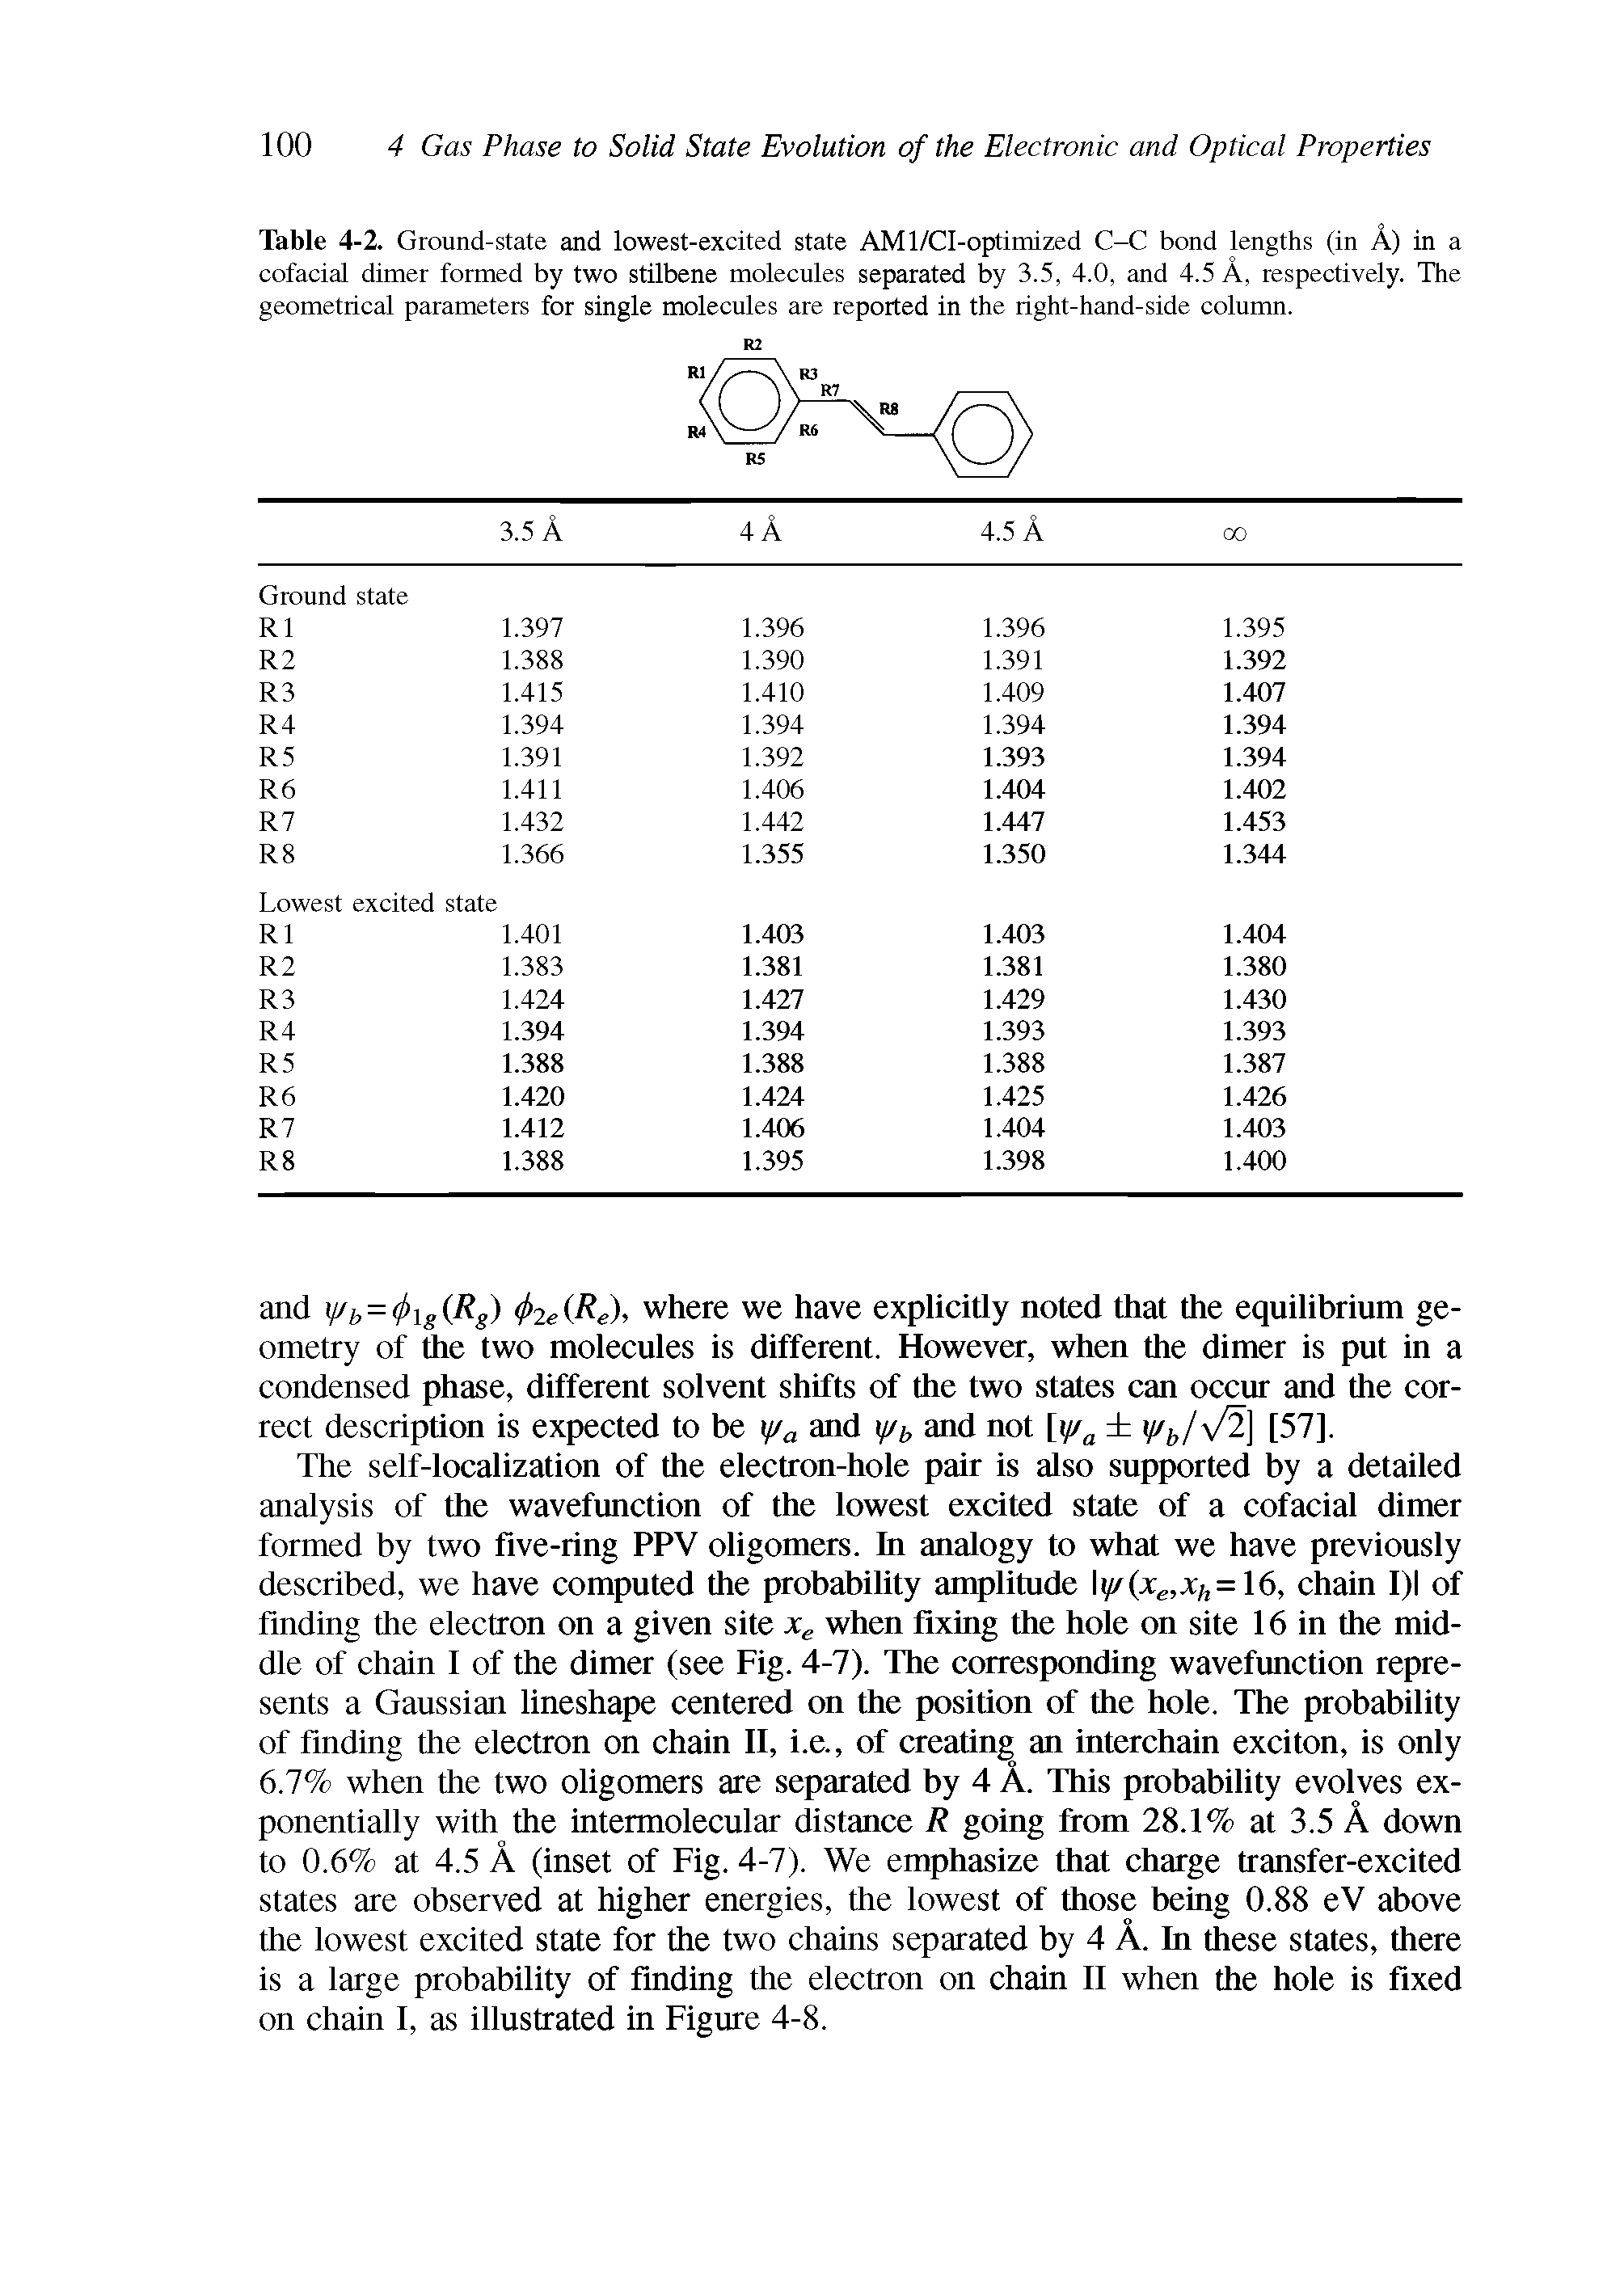 Table 4-2. Ground -state and lowest-excited state AMl/CI-optimized C-C bond lengths (in A) in a cofacial dimer formed by two stilbene molecules separated by 3.5, 4.0, and 4.5 A, respectively. The geometrical parameters for single molecules are reported in the right-hand-side column.